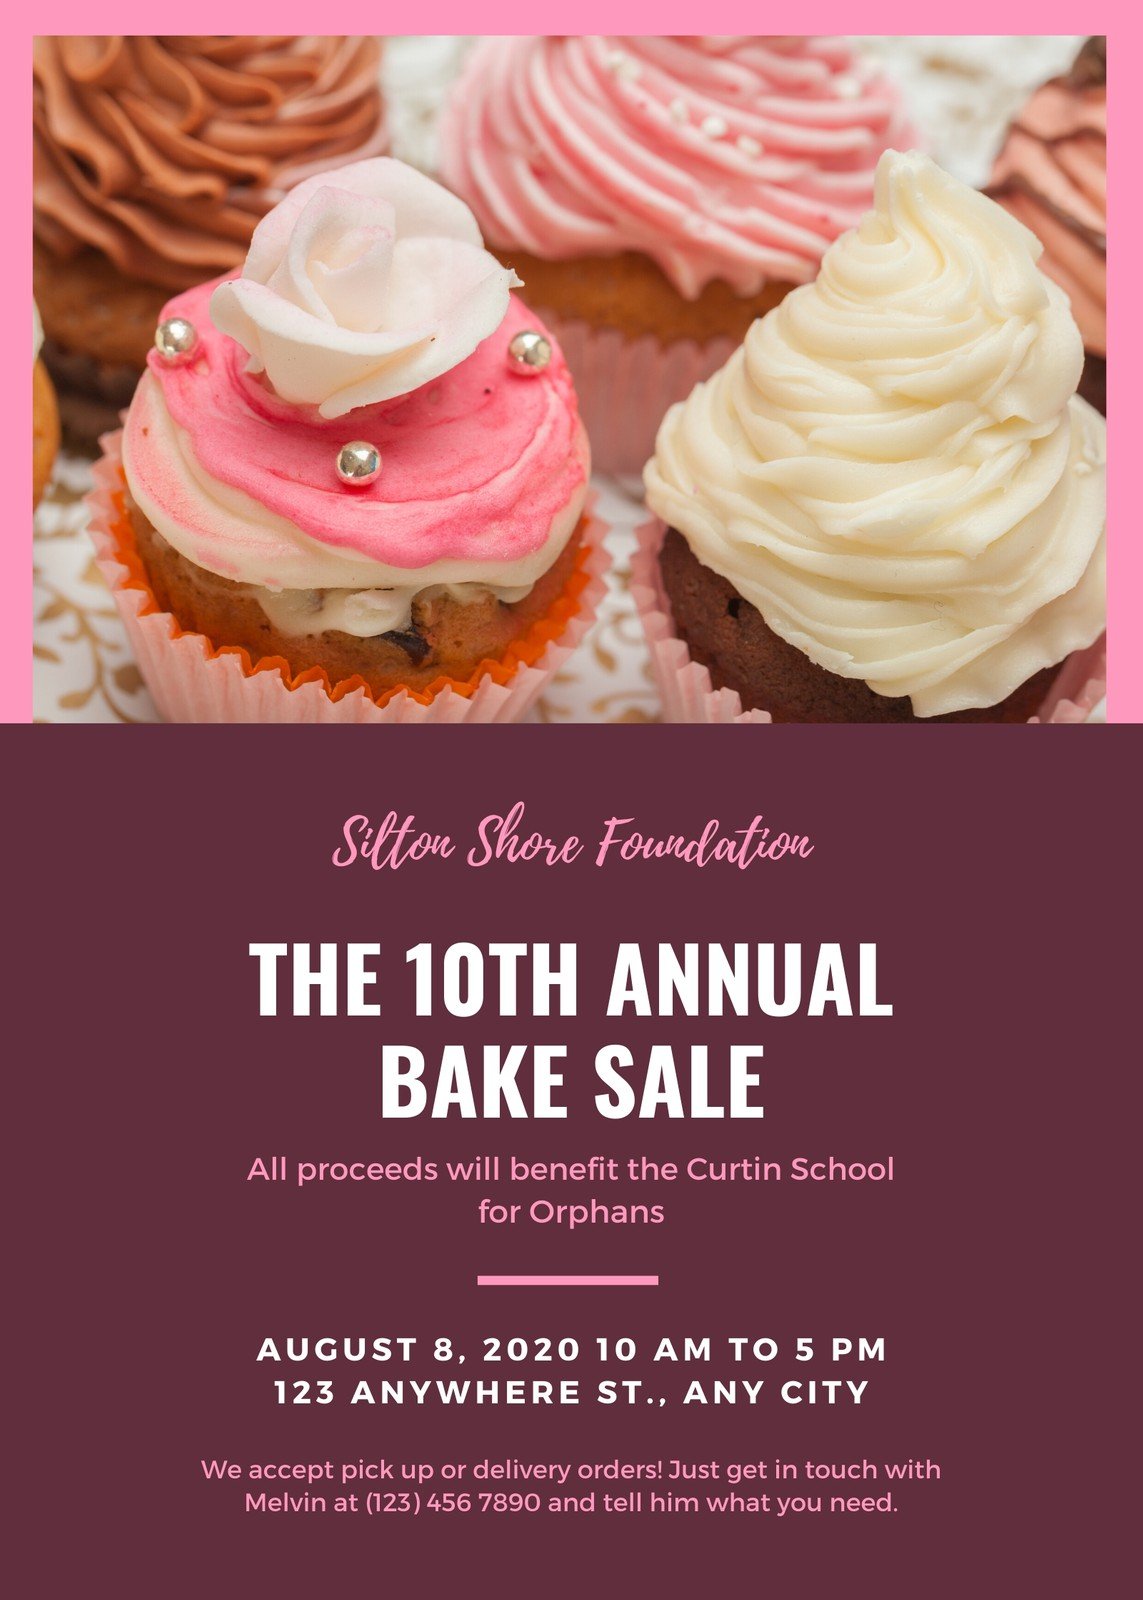 Customize 20+ Bake Sale Flyers Templates Online - Canva Pertaining To Cupcake Flyer Templates Free